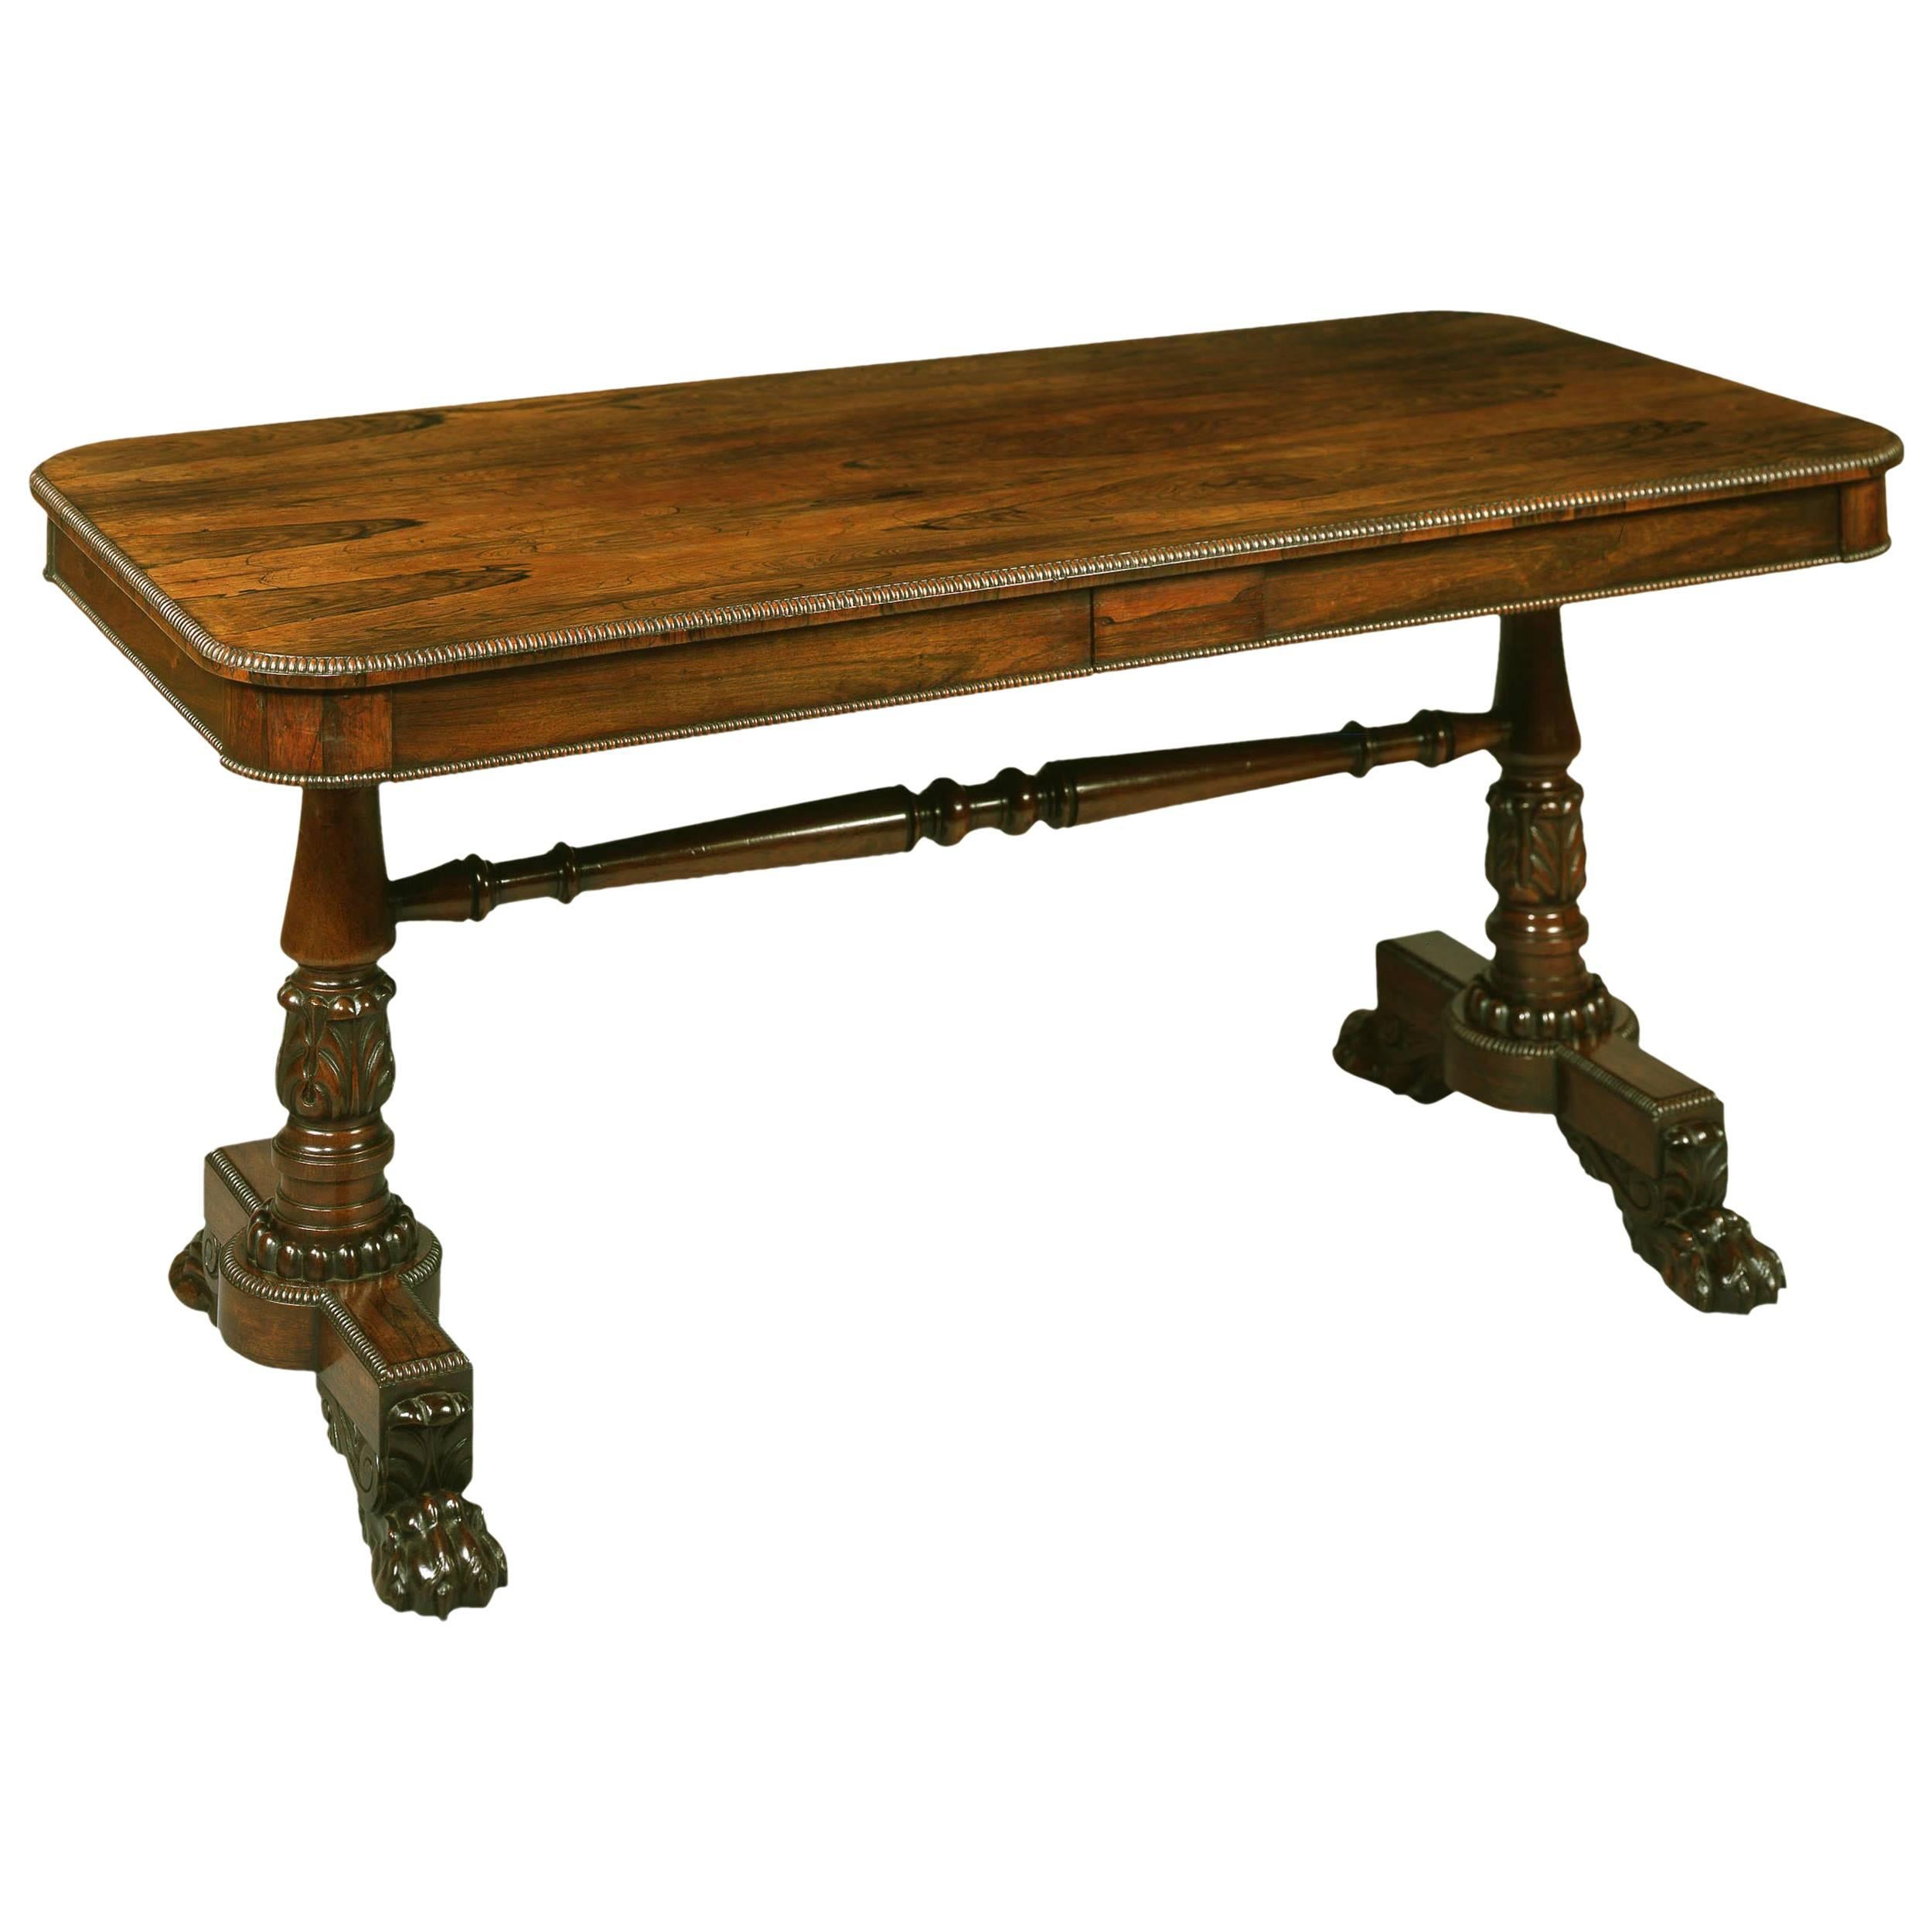 Antique End Support Table Attributed to Gillows of Lancaster